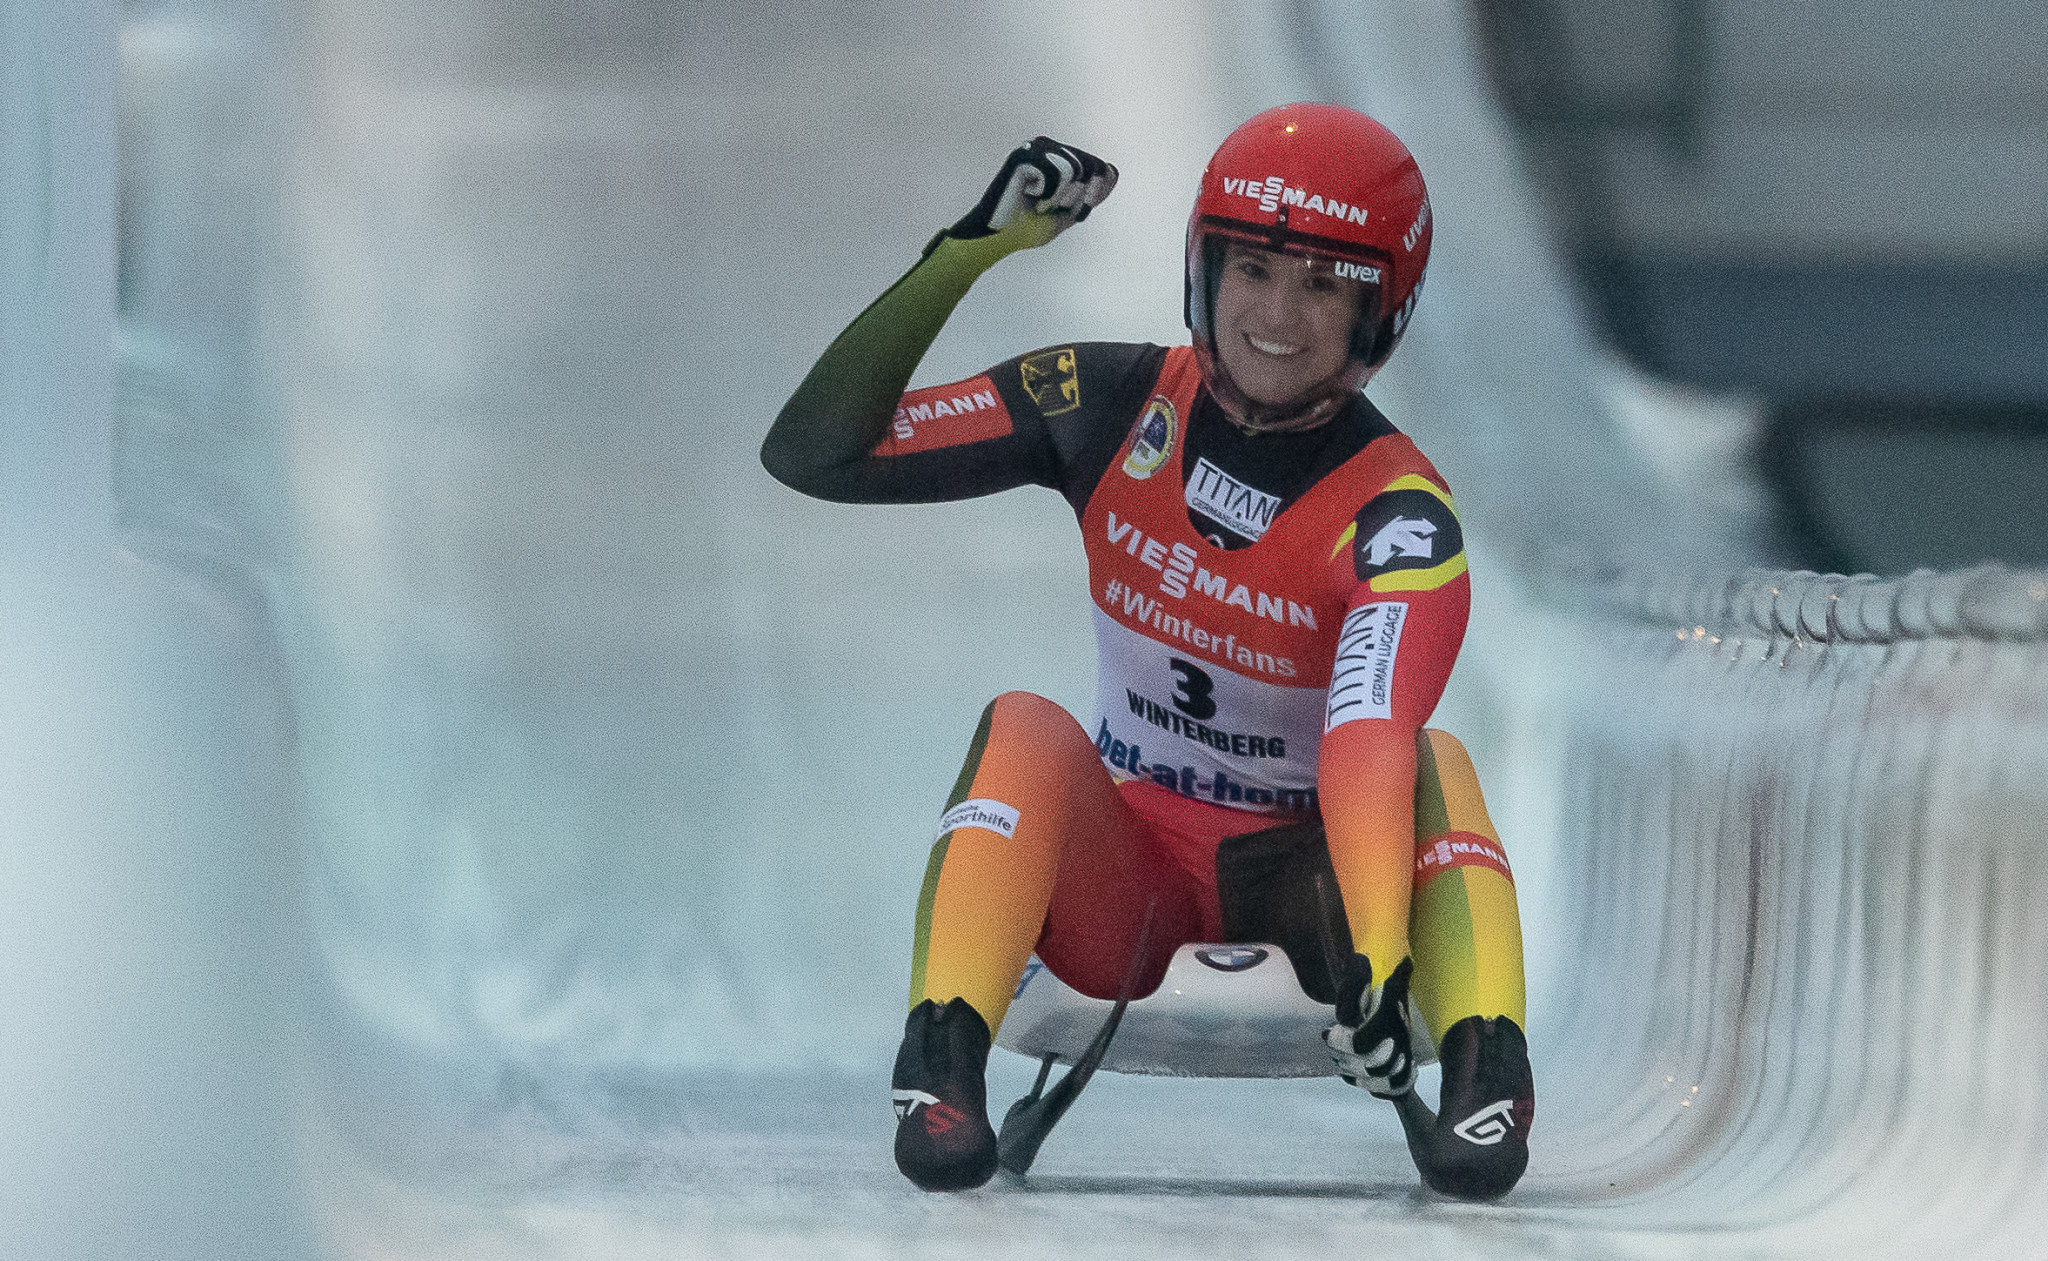 Natalie Geisenberger triumphed in the women's competition at the FIL World Championships in Winterberg ©Getty Images